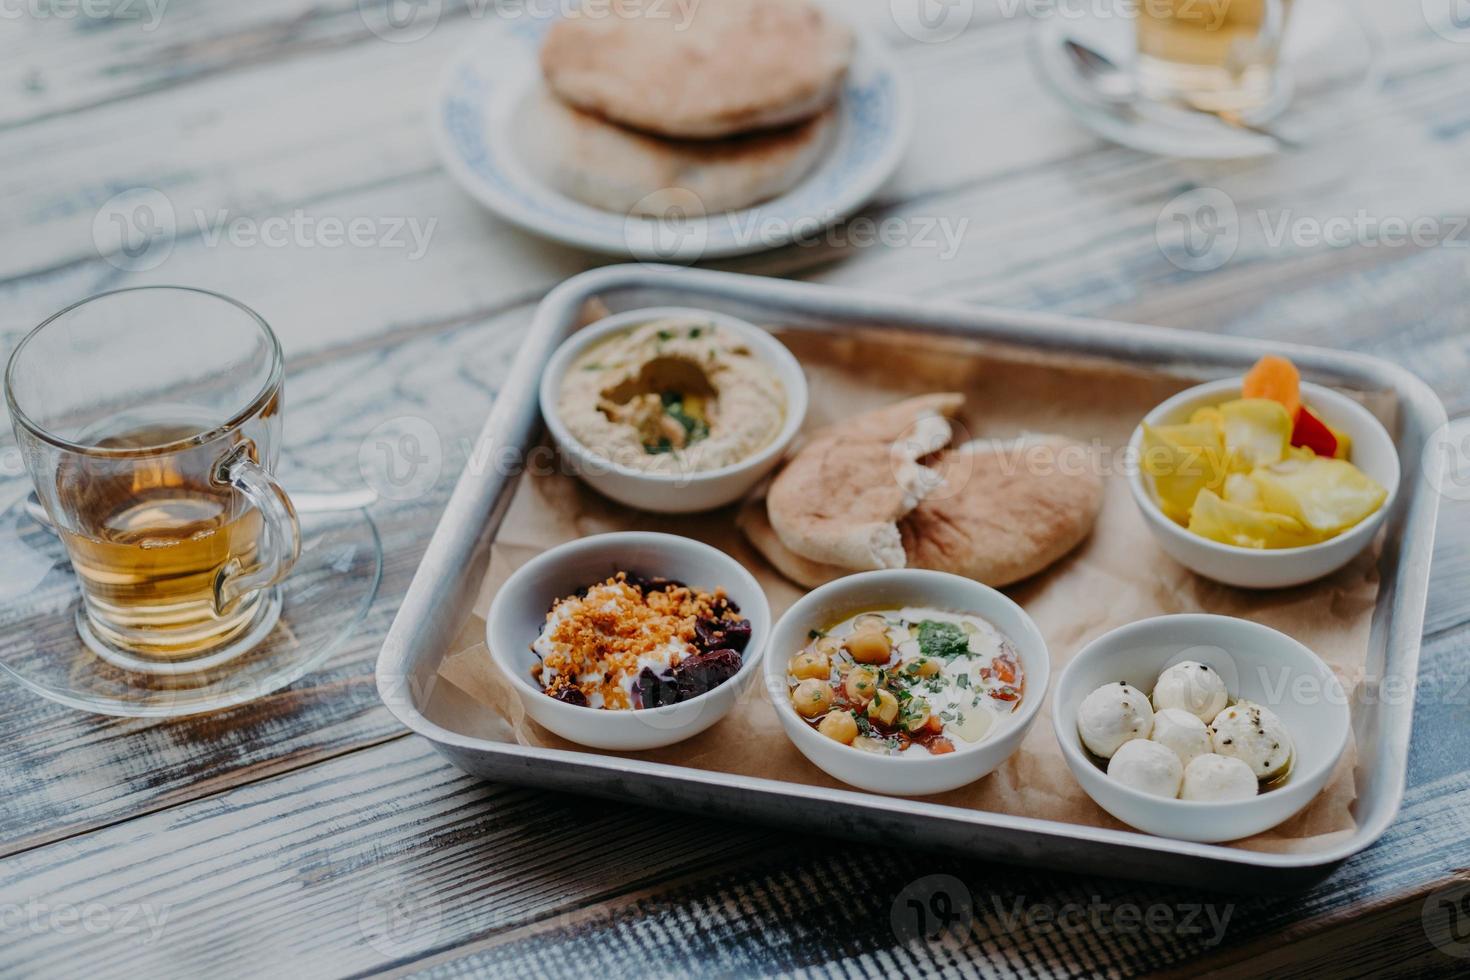 Overhead image of traditional Israel food on tray. Hummus, domestic goat cheese, tomatoe core, beetroot with spices, pita bread, beverage in glass photo